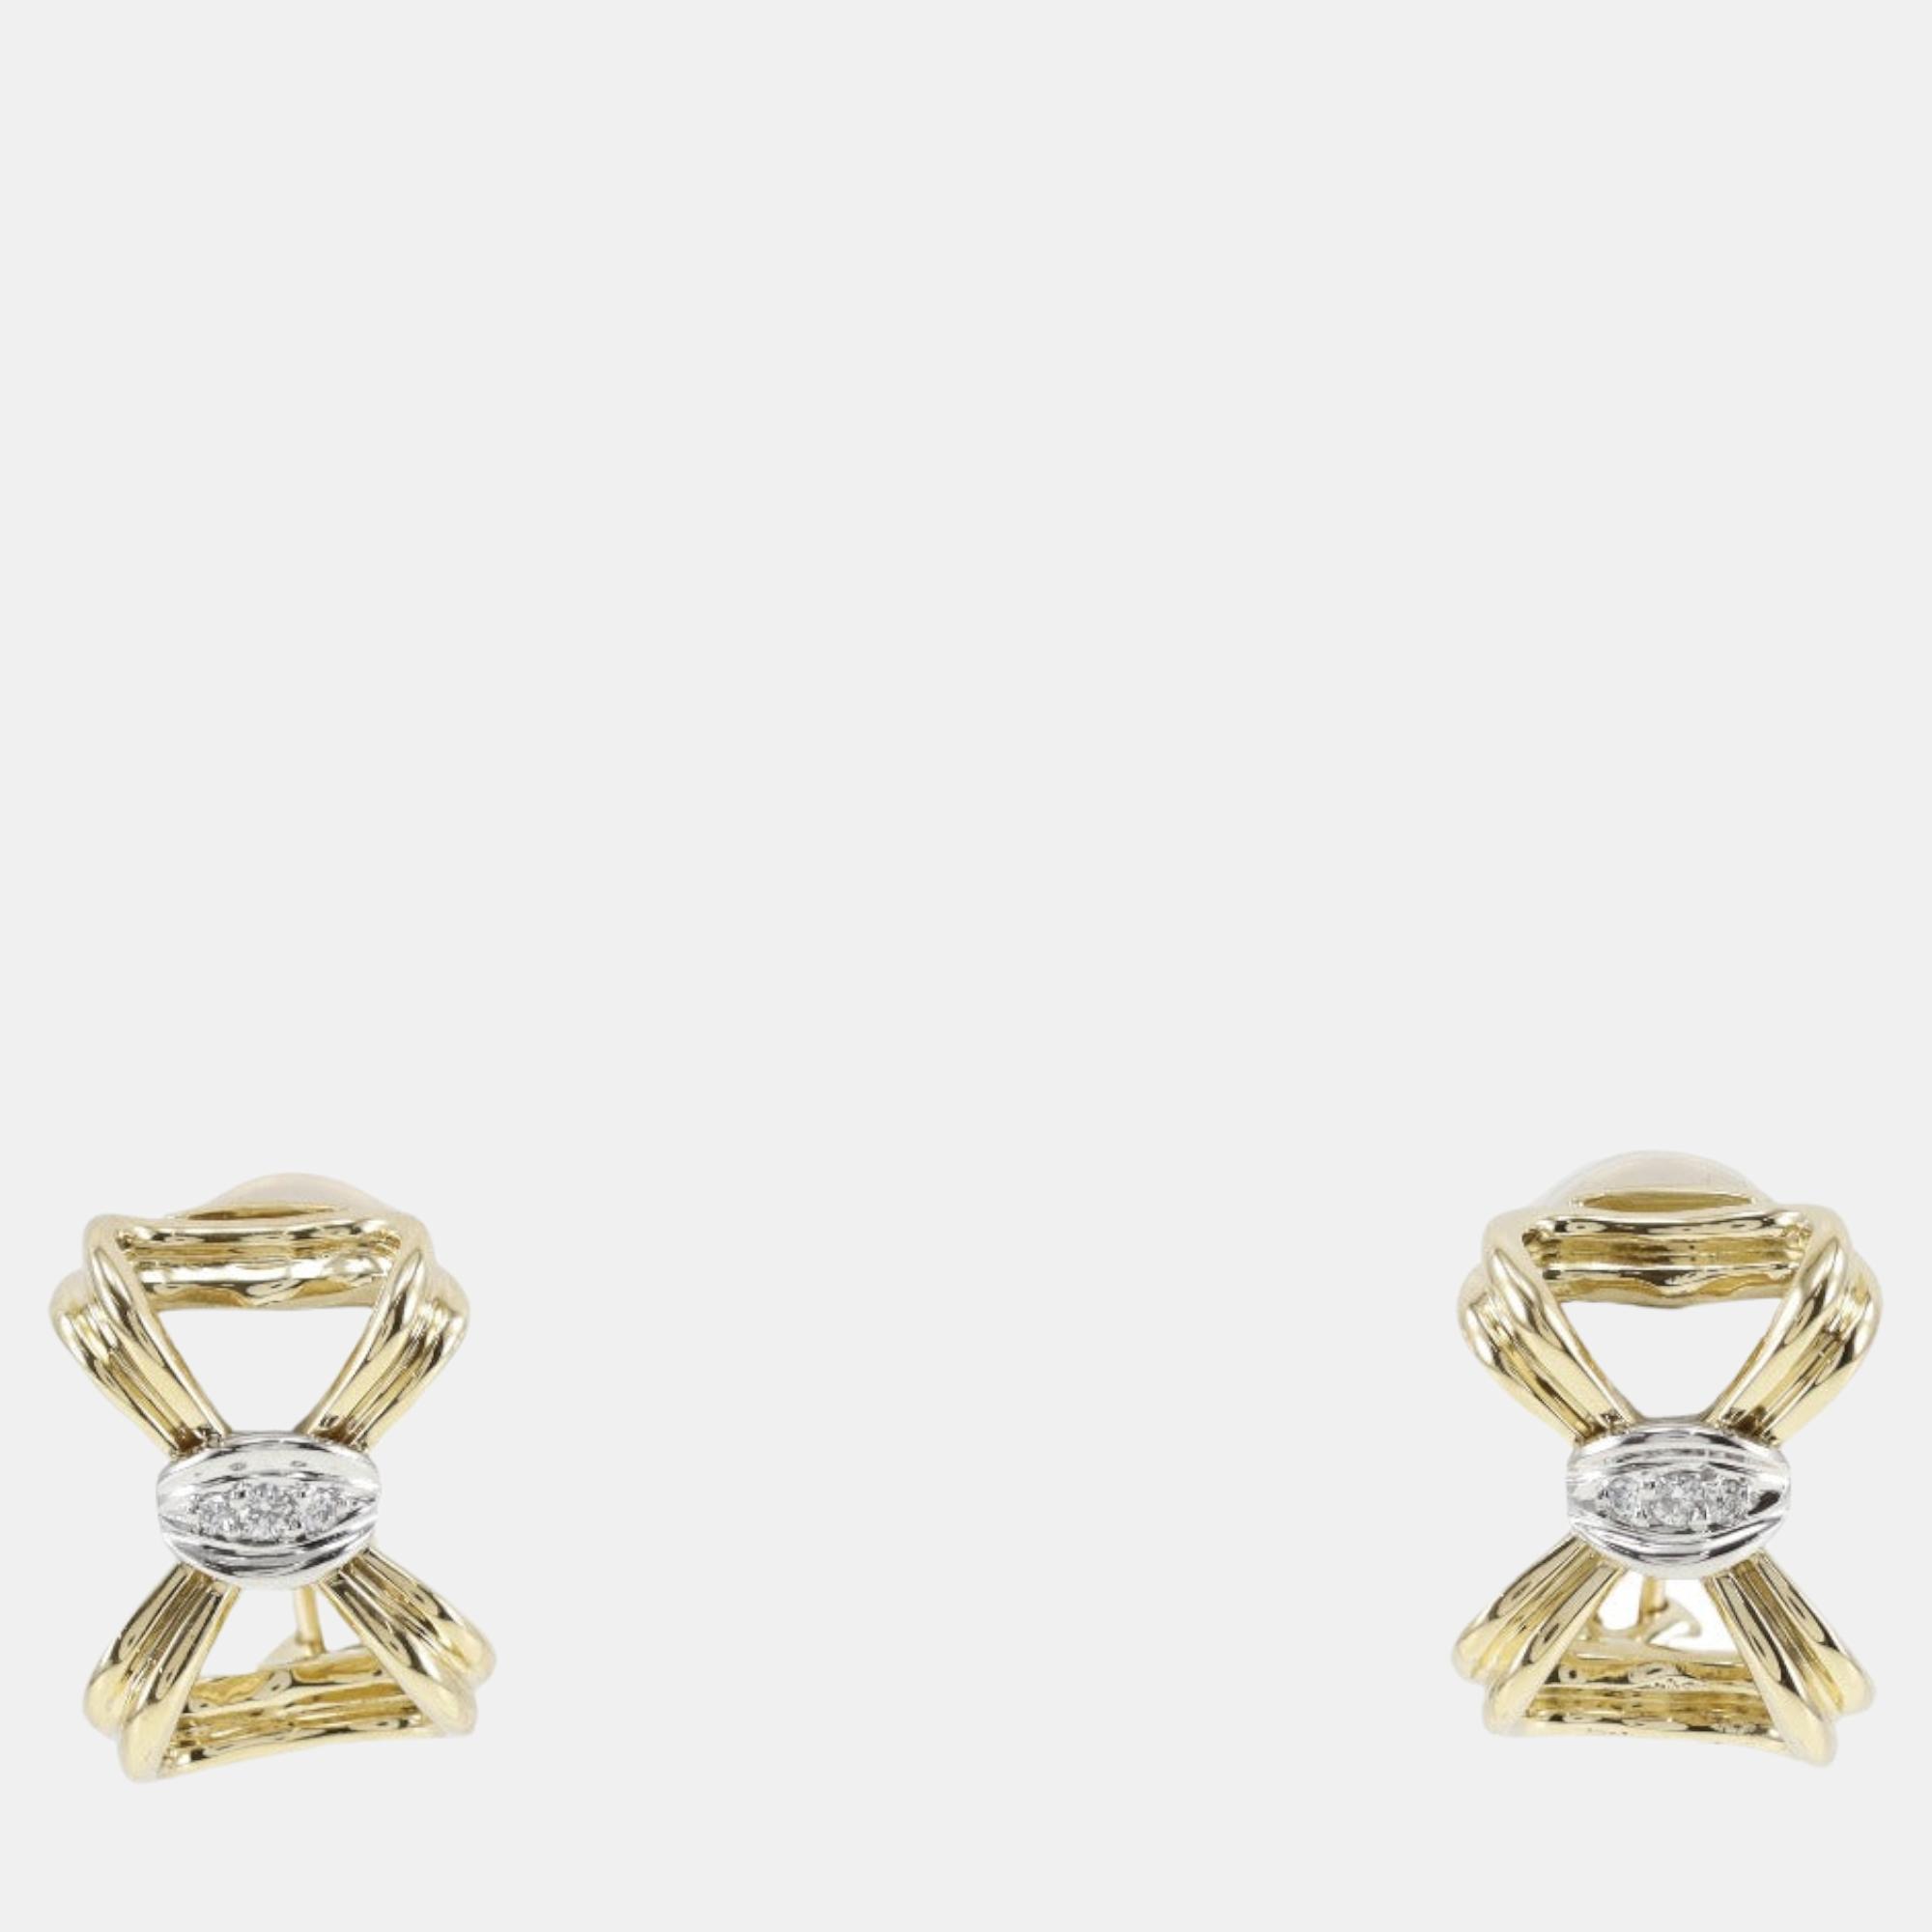 Let these special earrings be a complementing add on. Carefully designed they have a timeless allure and are comfortable to wear.